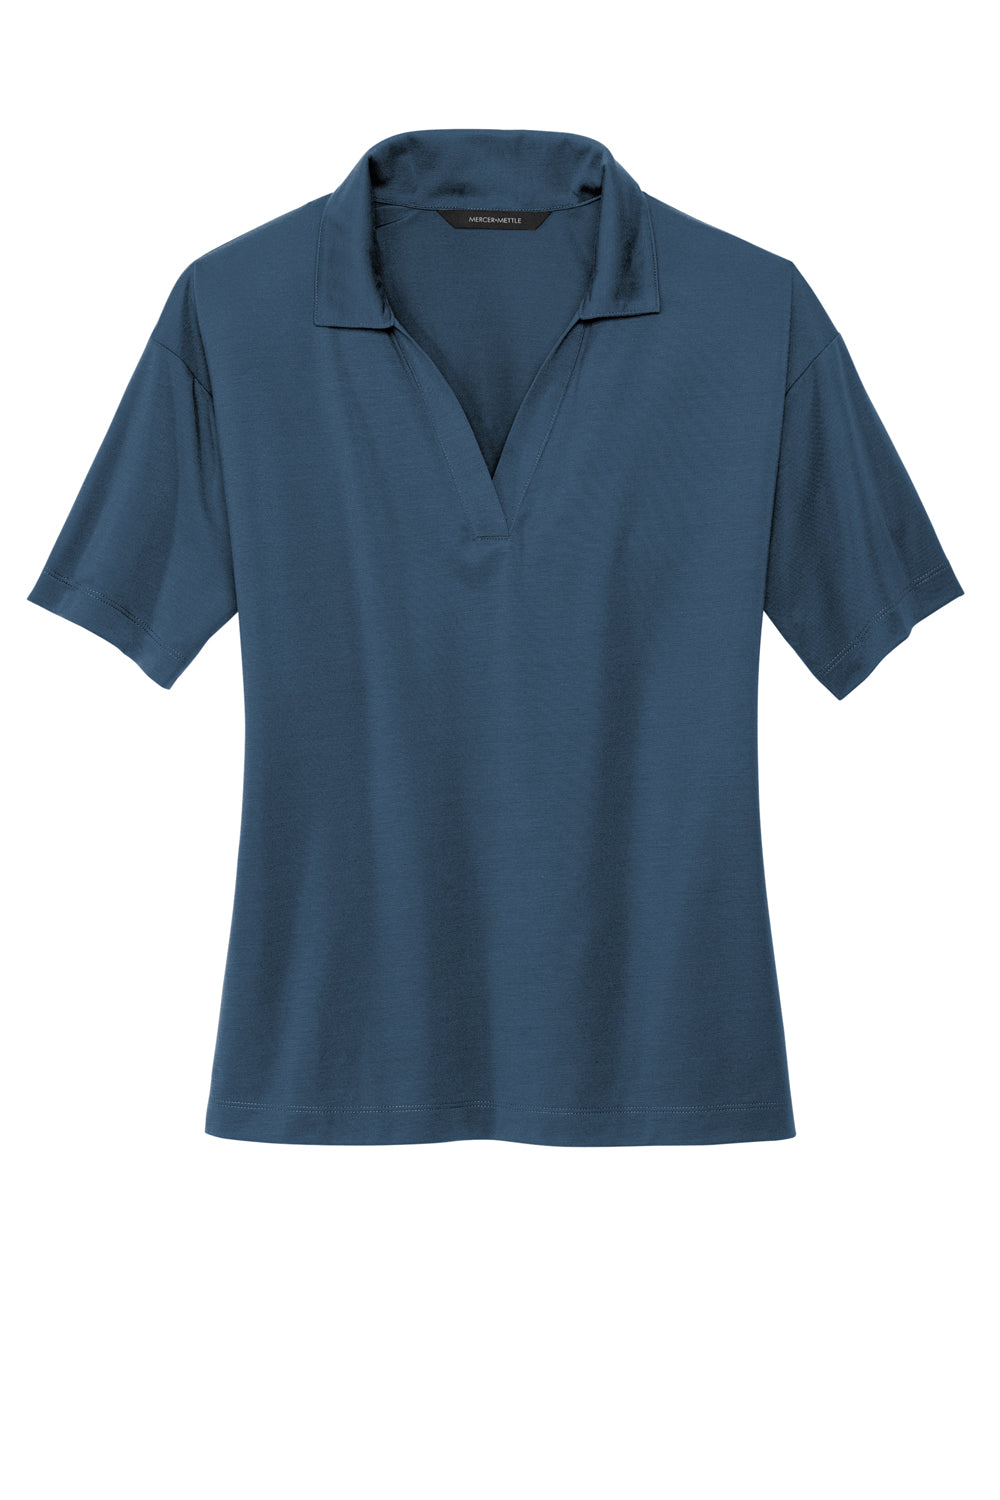 Mercer+Mettle MM1015 Stretch Jersey Short Sleeve Polo Shirt Insignia Blue Flat Front